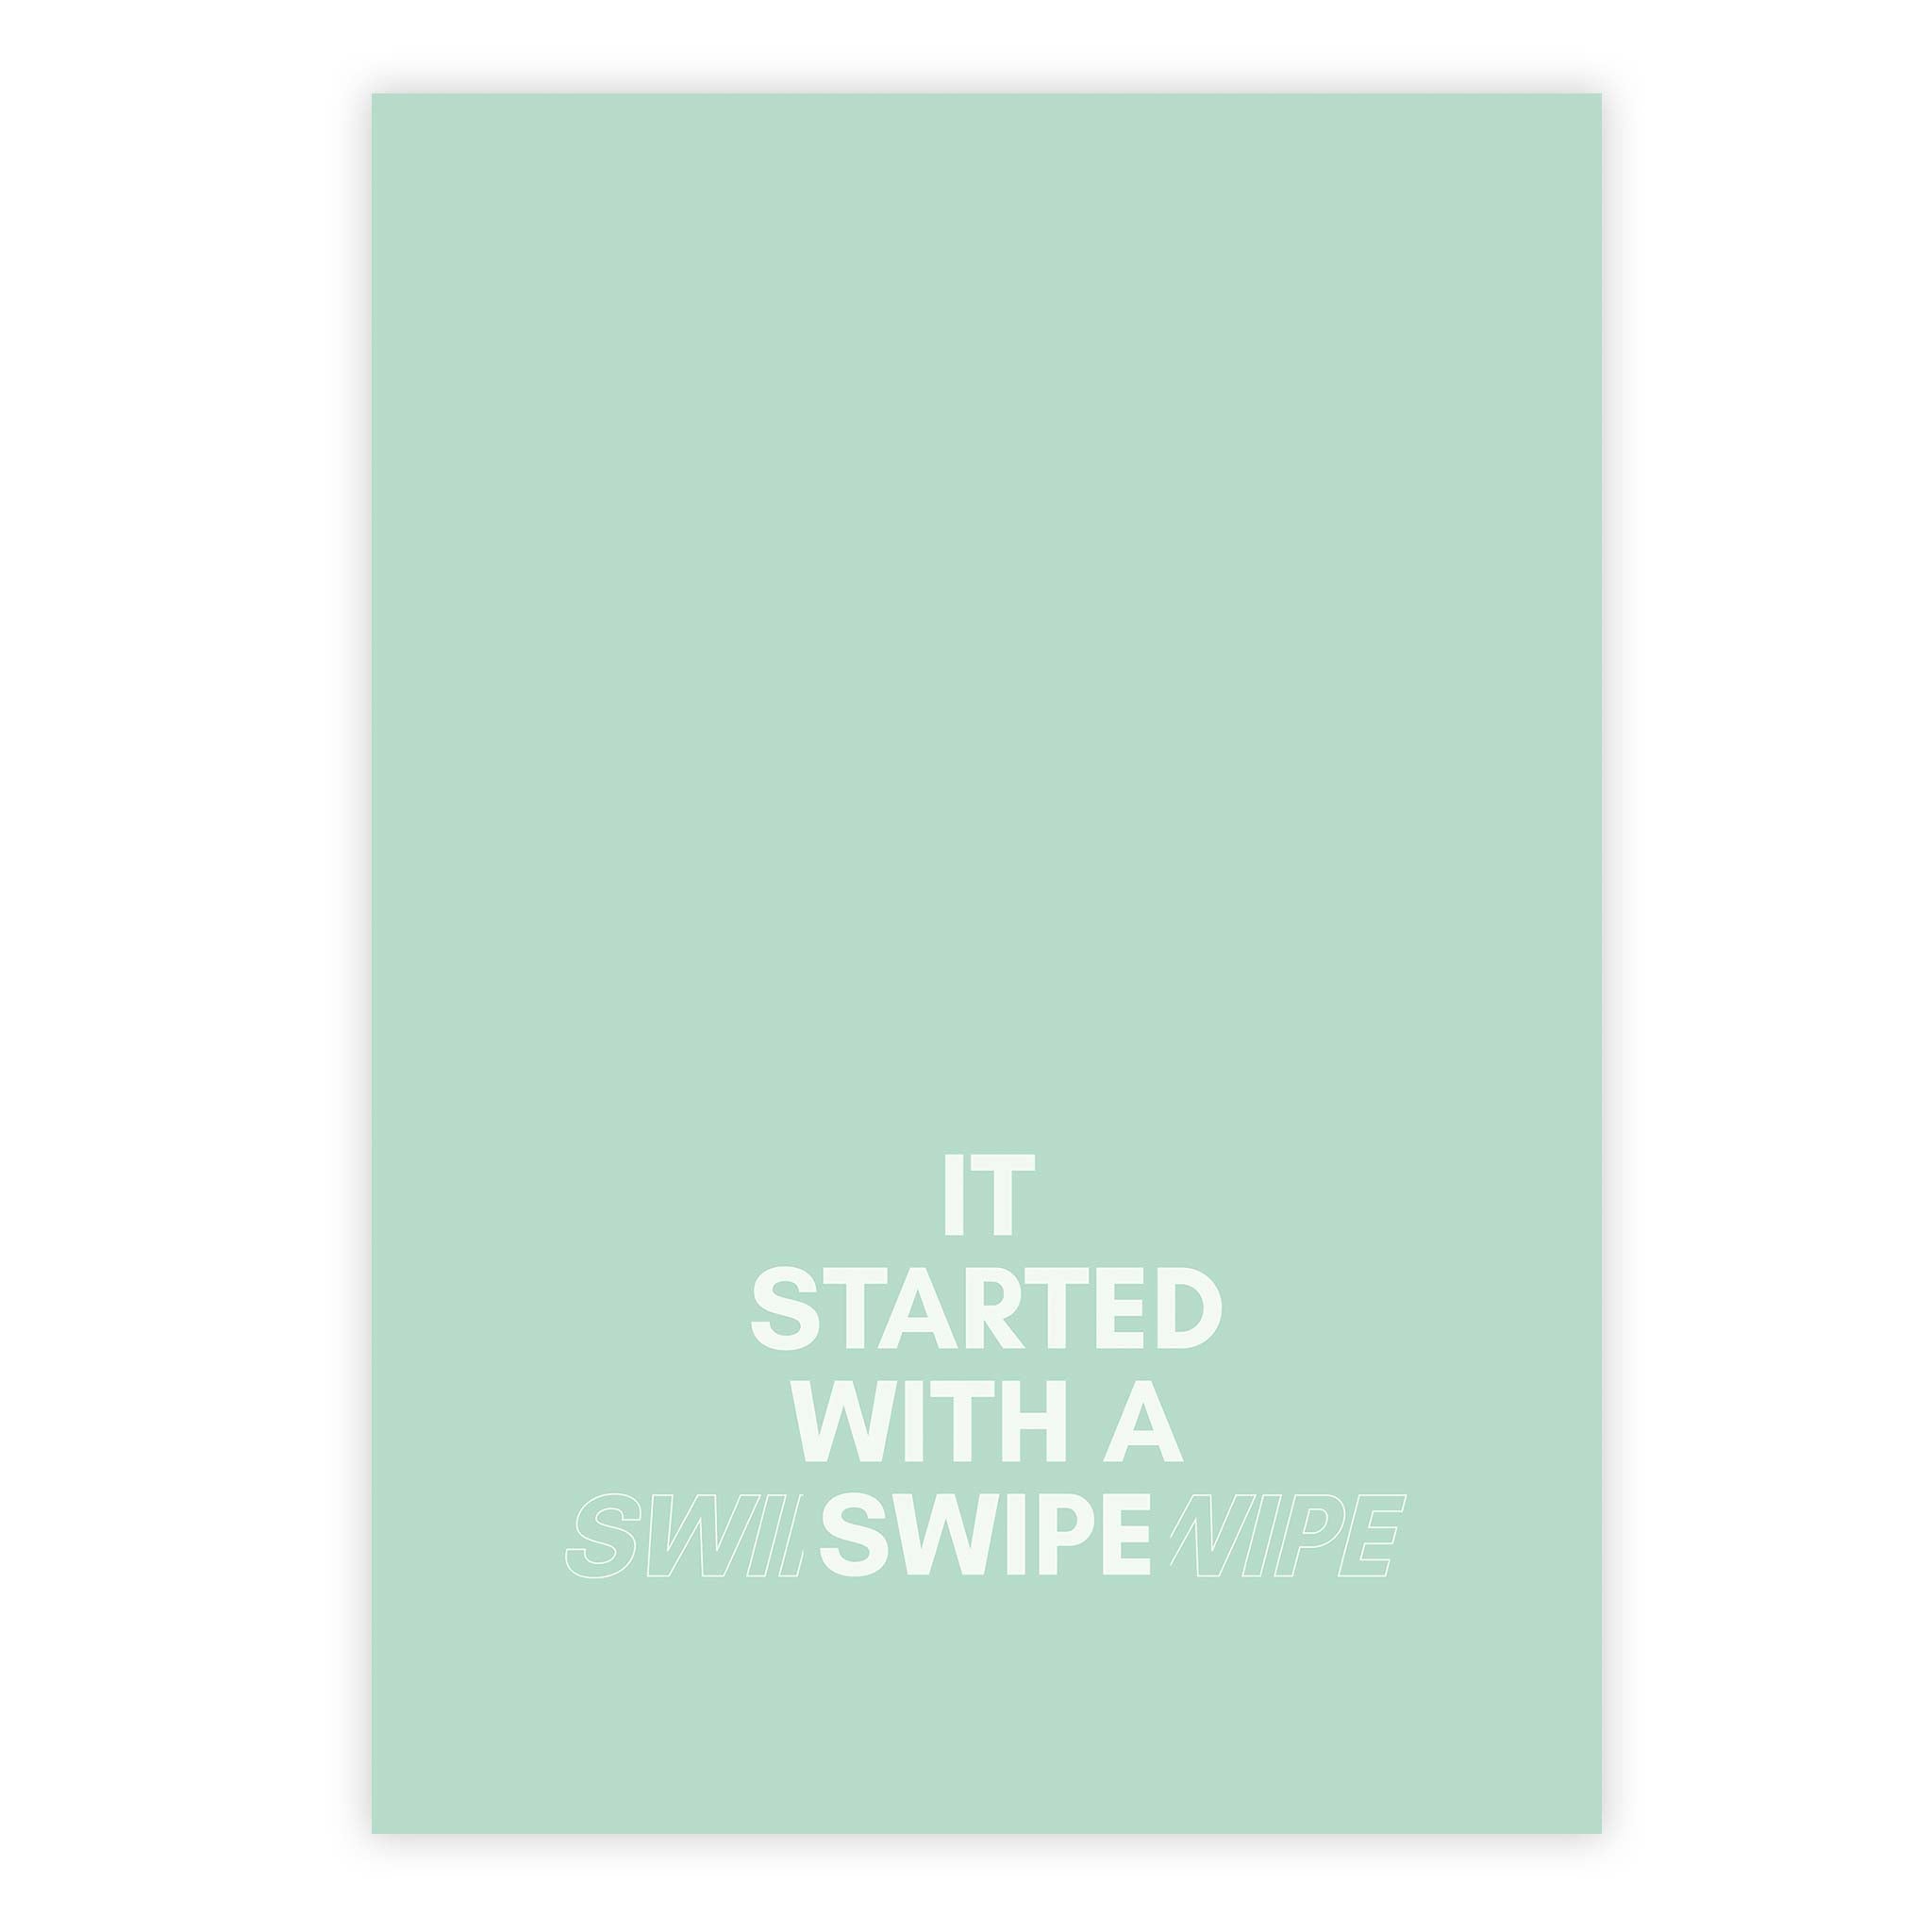 It started with a swipe